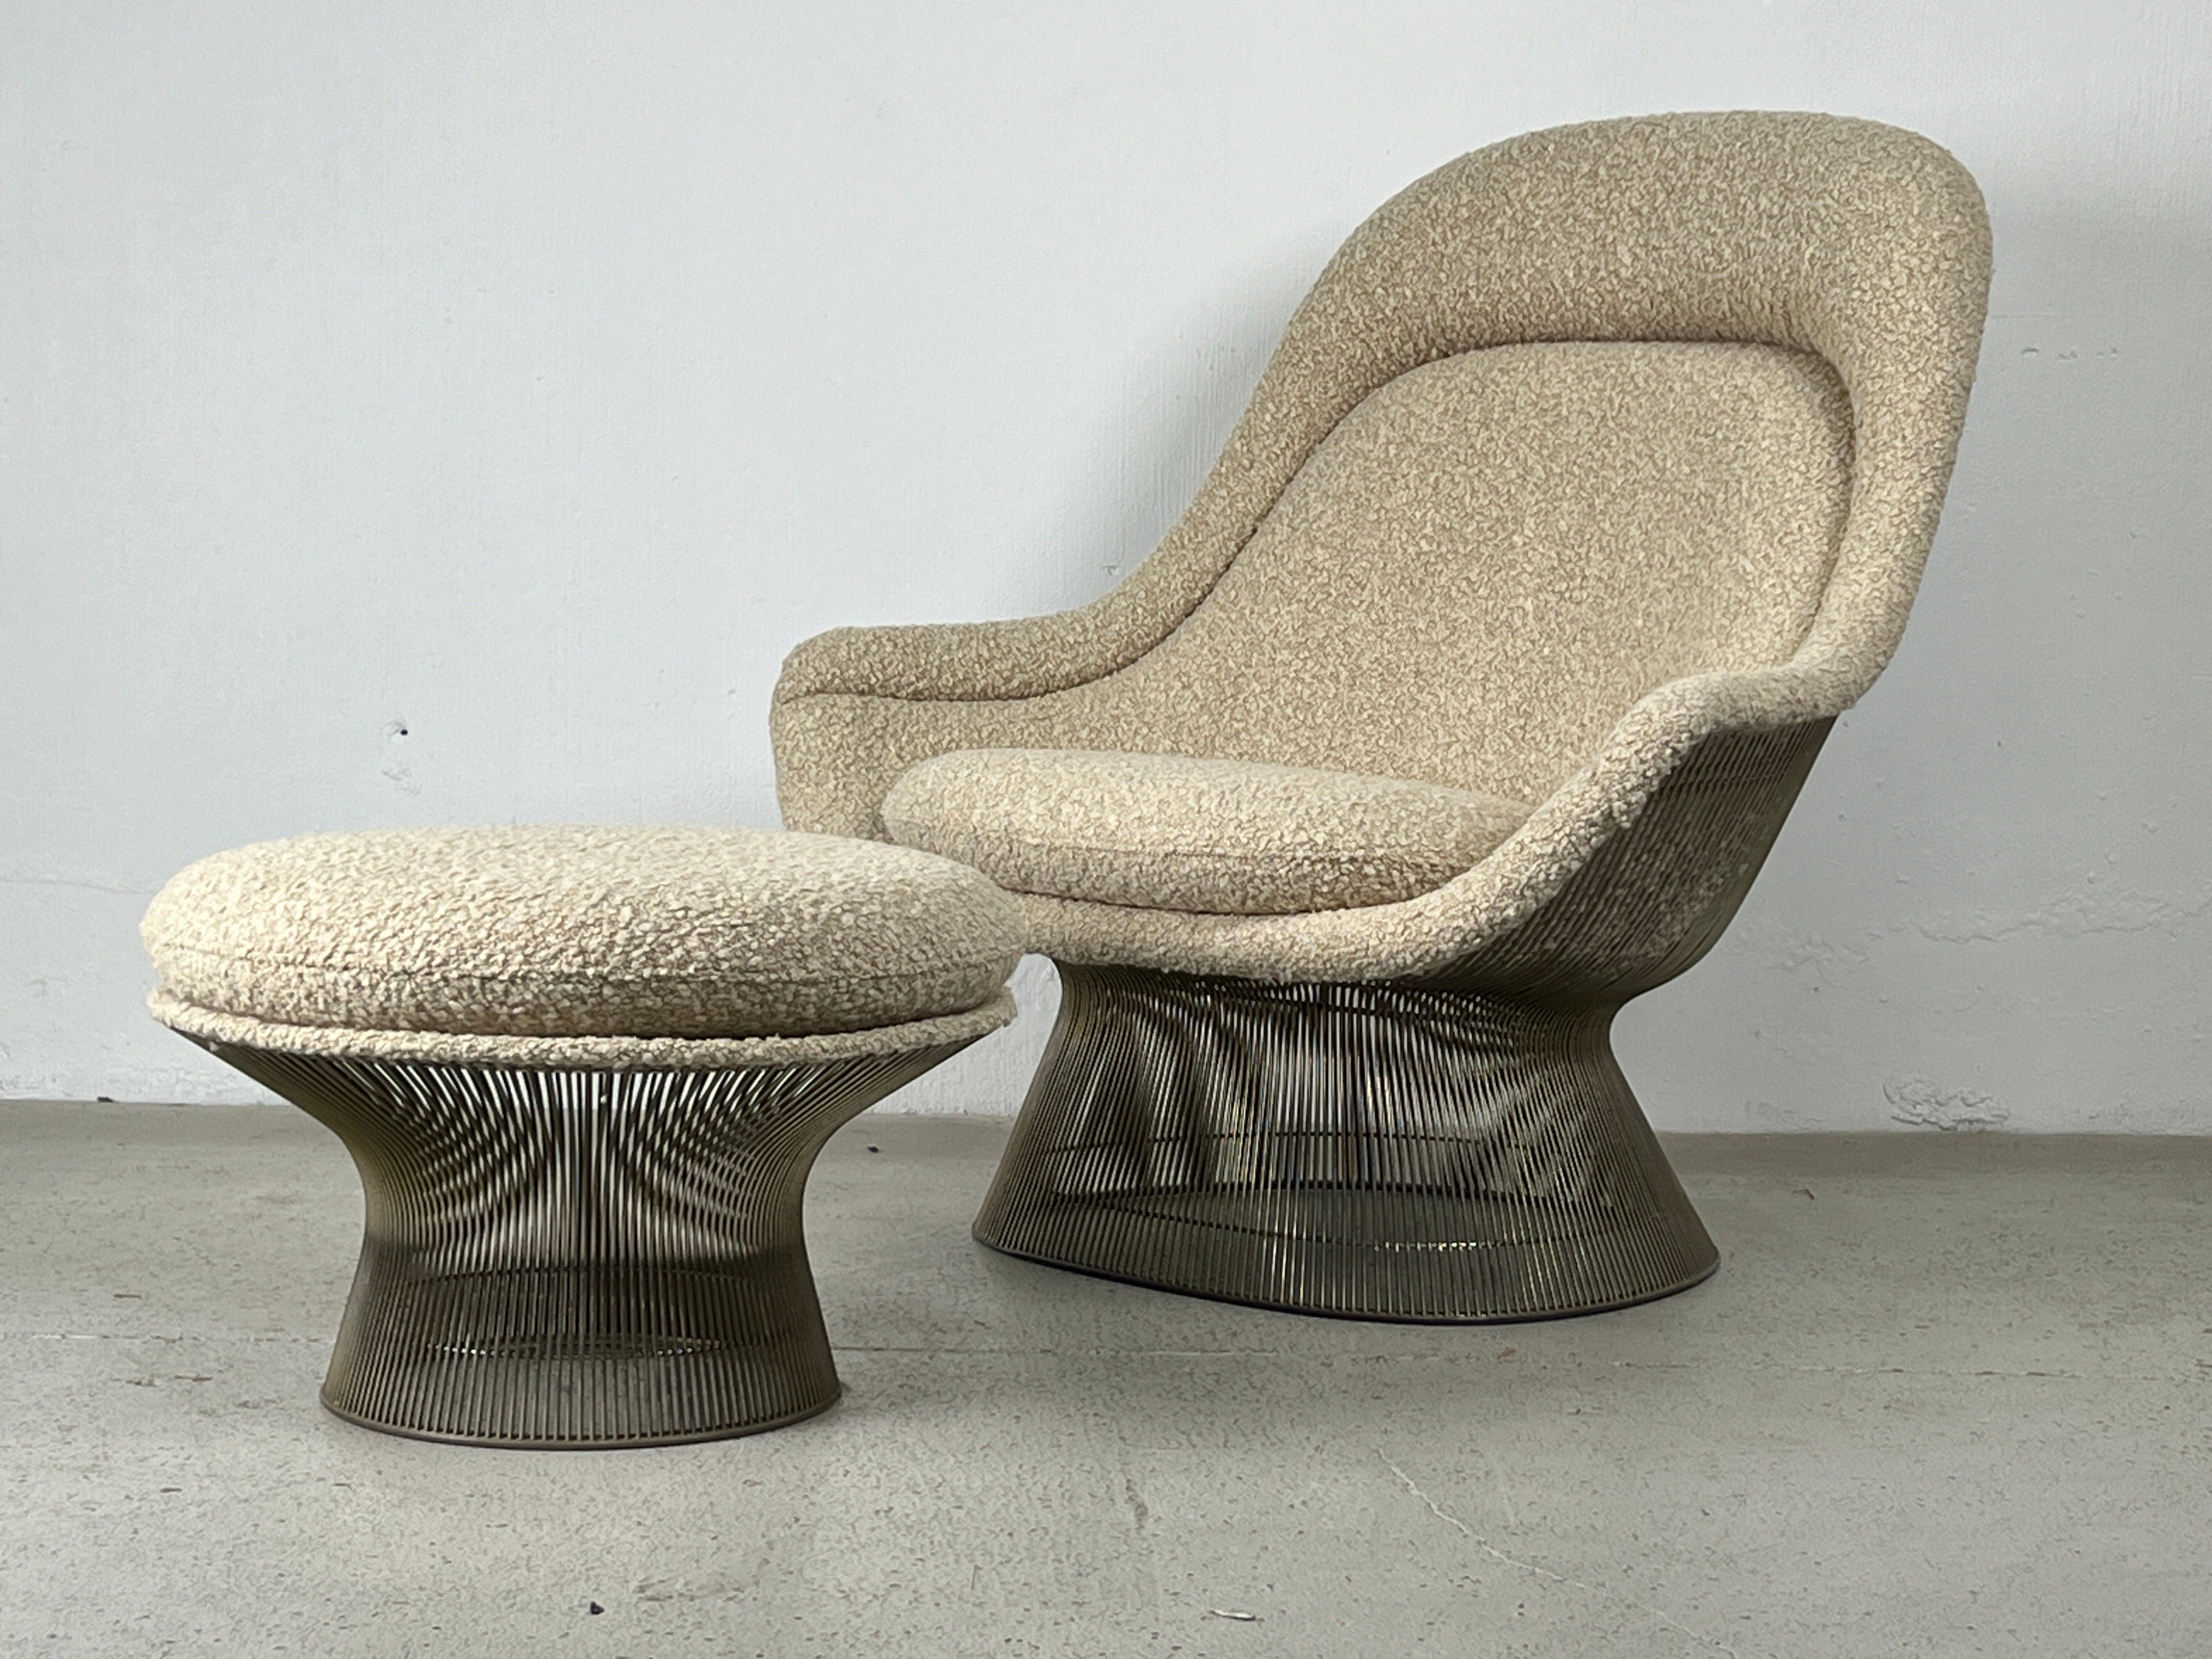 A nickel plated throne chair and ottoman designed by Warren Platner for Knoll. Reupholstered in Holly Hunt / Breathe Easy / Latte. 